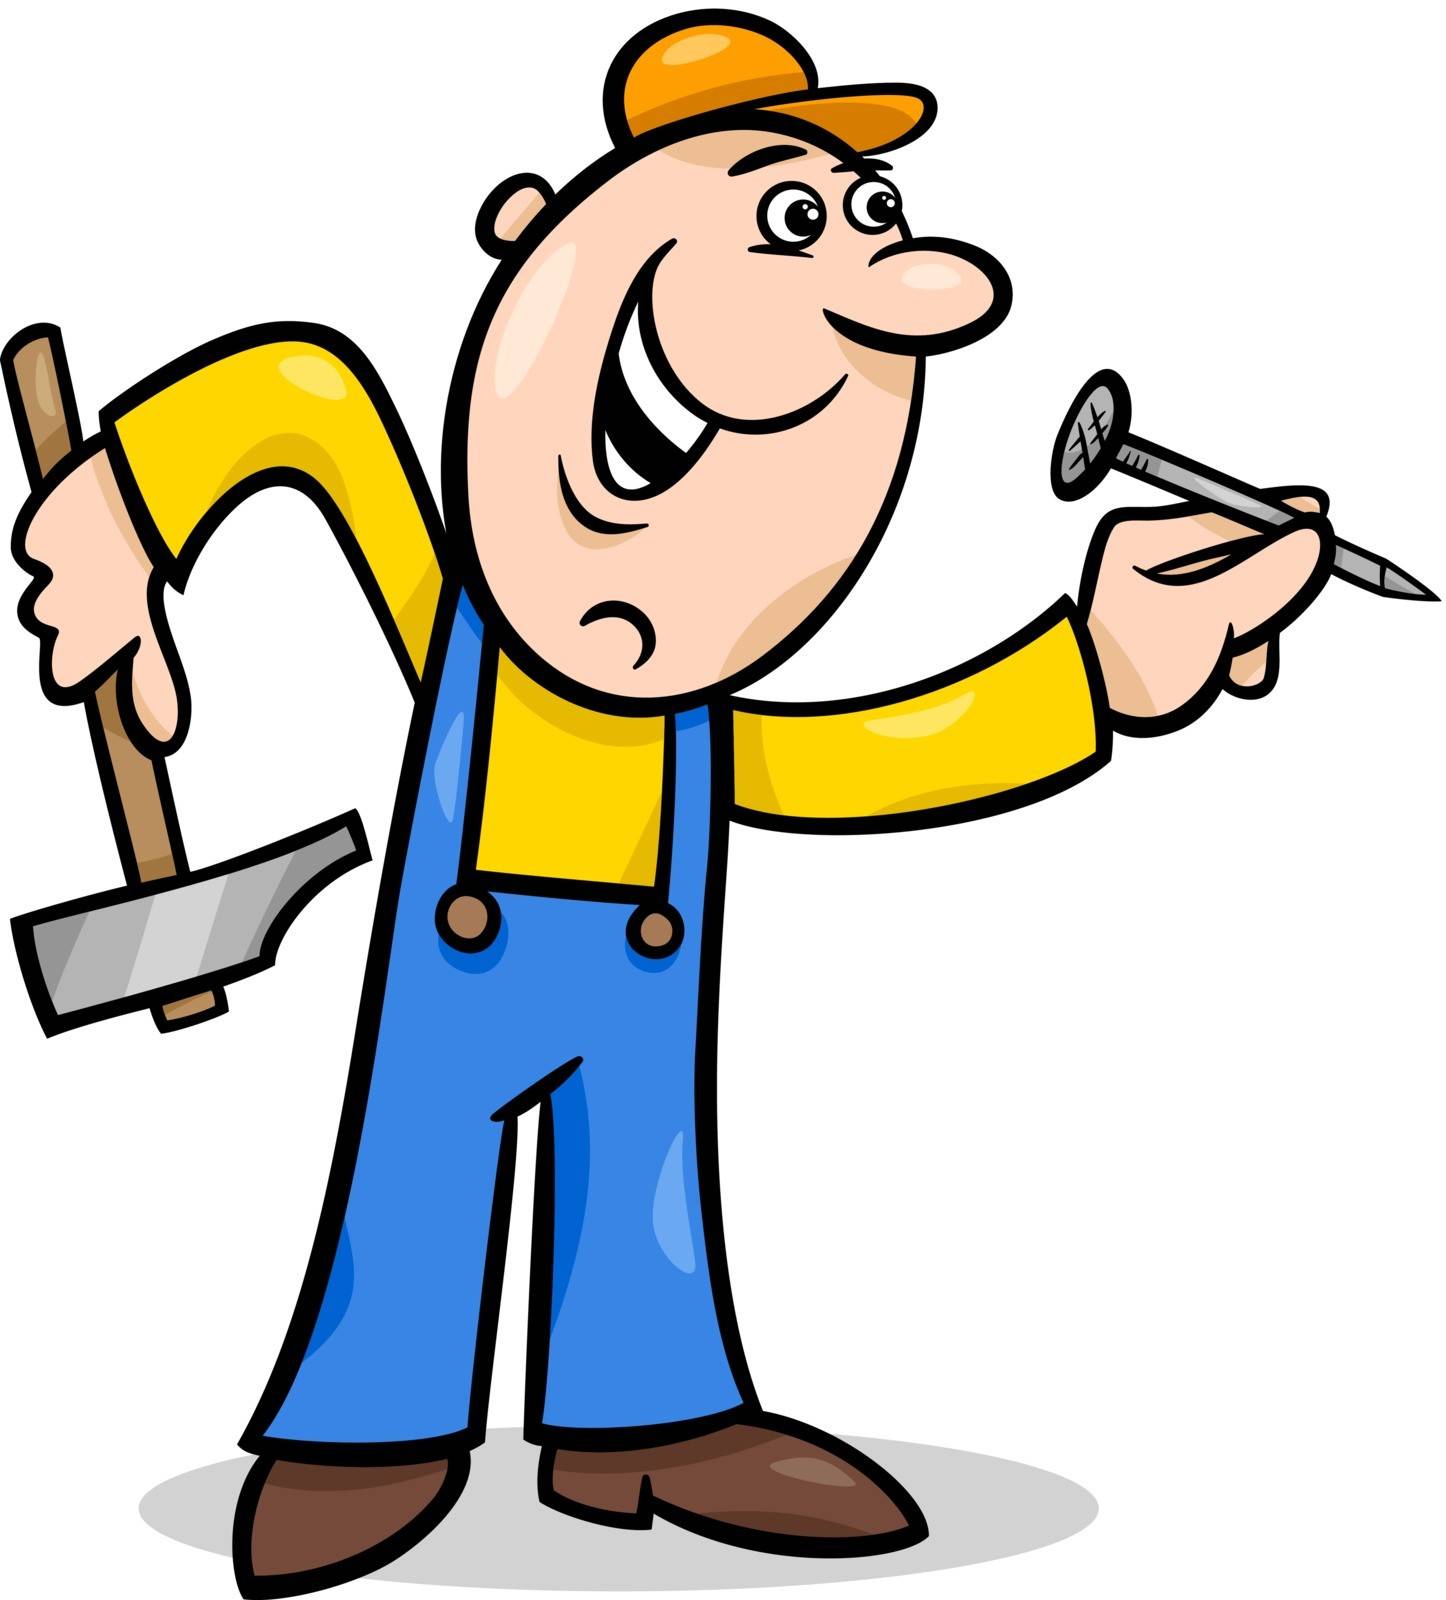 Cartoon Illustration of Worker with Hammer and Nail doing Renovation